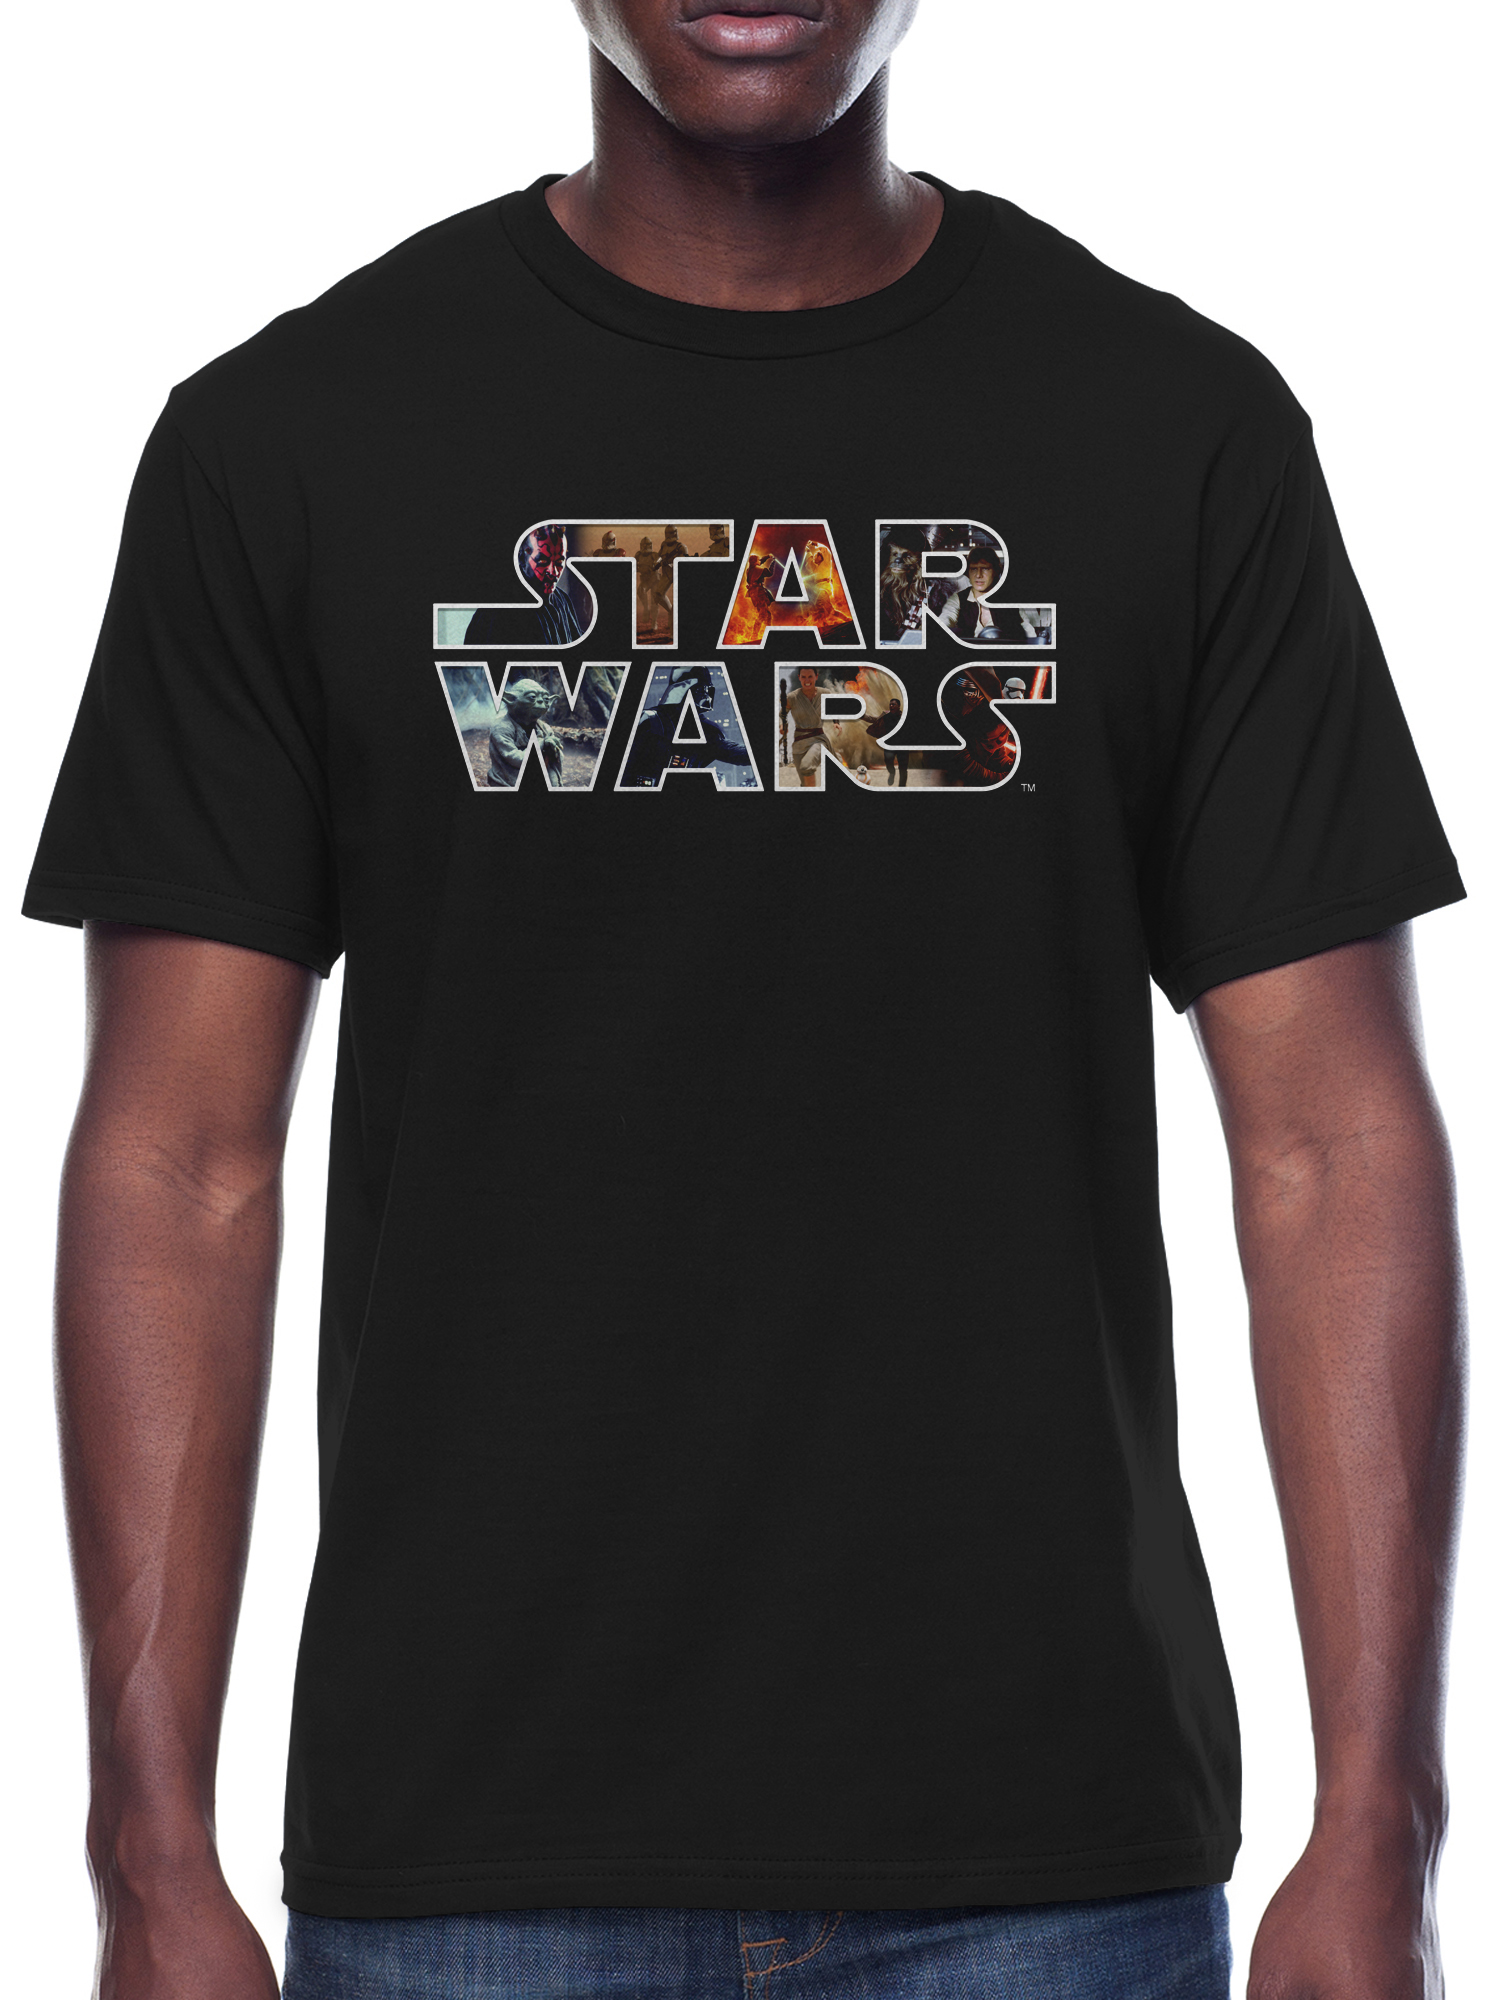 Star Wars Short Sleeve Graphic Crew Neck Relaxed Fit T-Shirt (Men's) 1 Pack - image 1 of 4